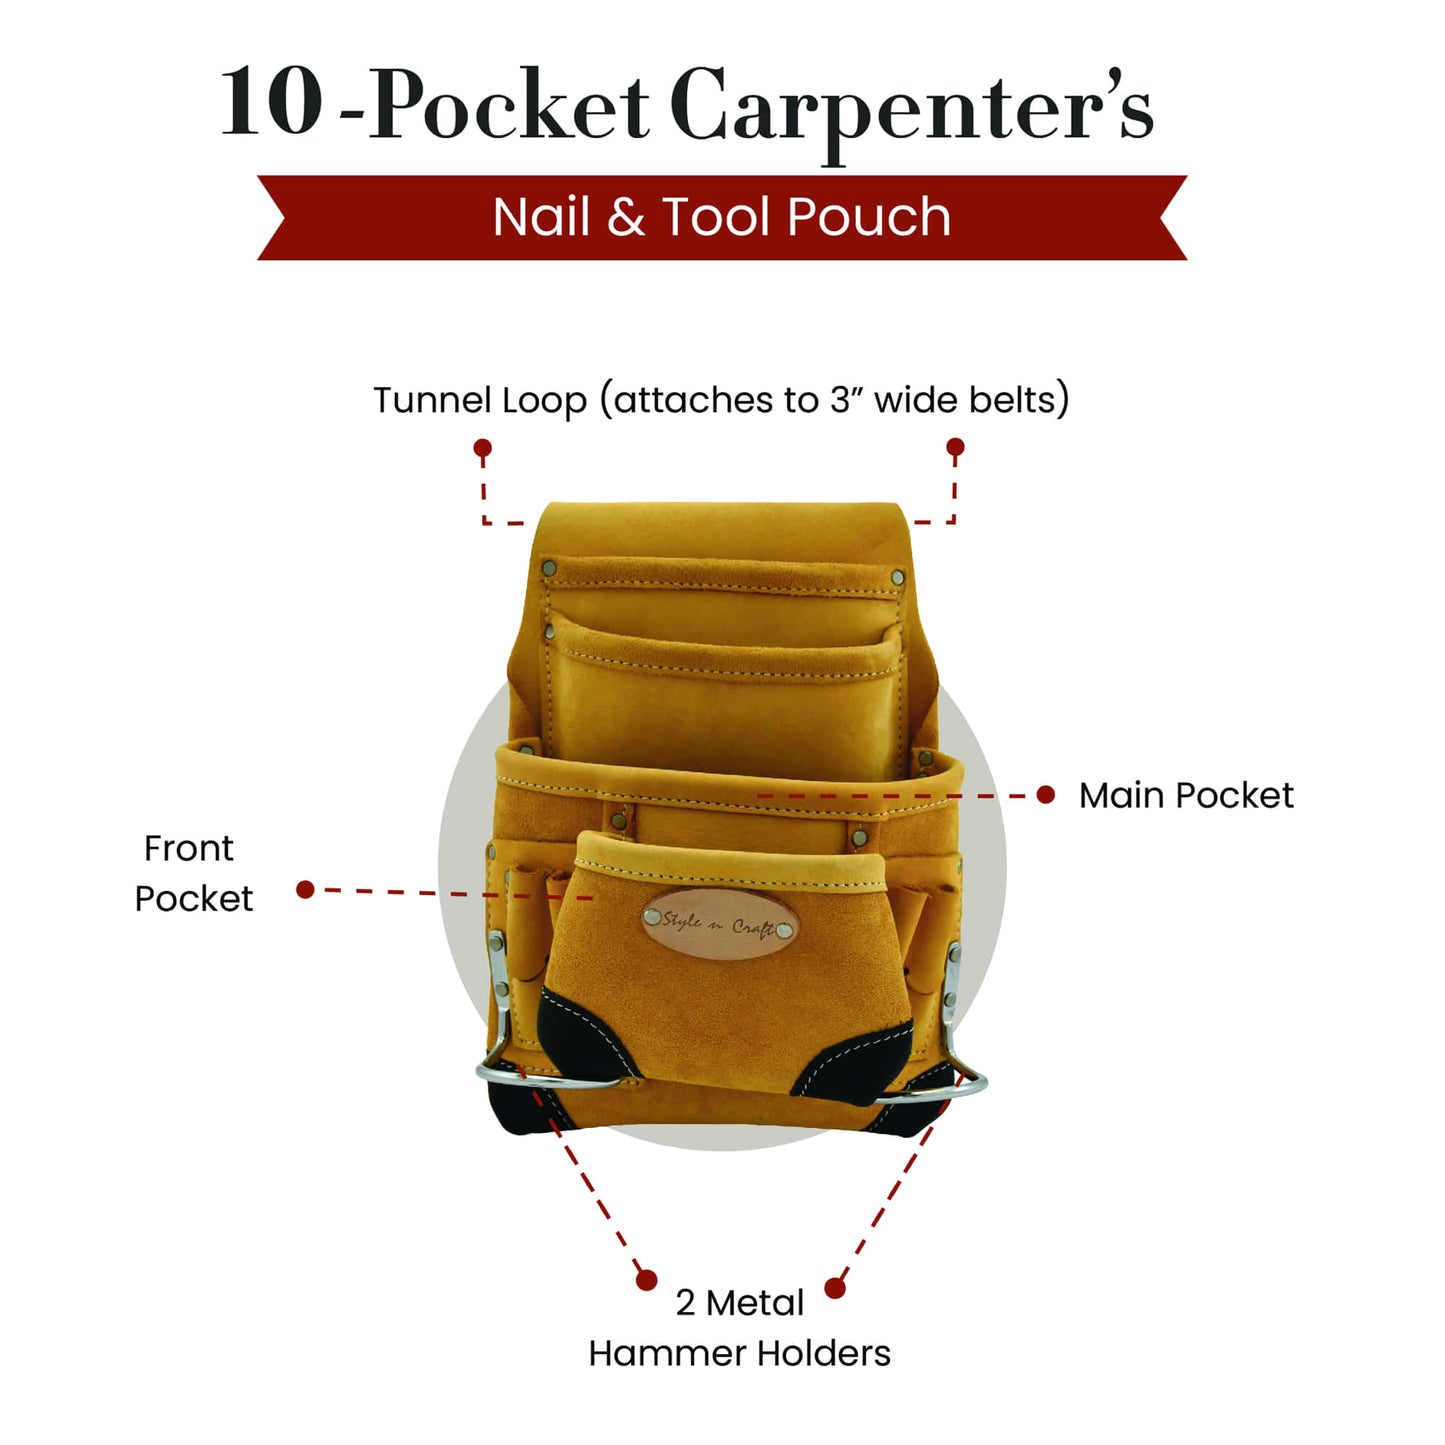 Style n Craft 93923 - 10 Pocket Carpenter's Nail & Tool Pouch in Yellow Top Grain Leather with Reinforced Corners in Black Top Grain Leather - Front View Showing the Details